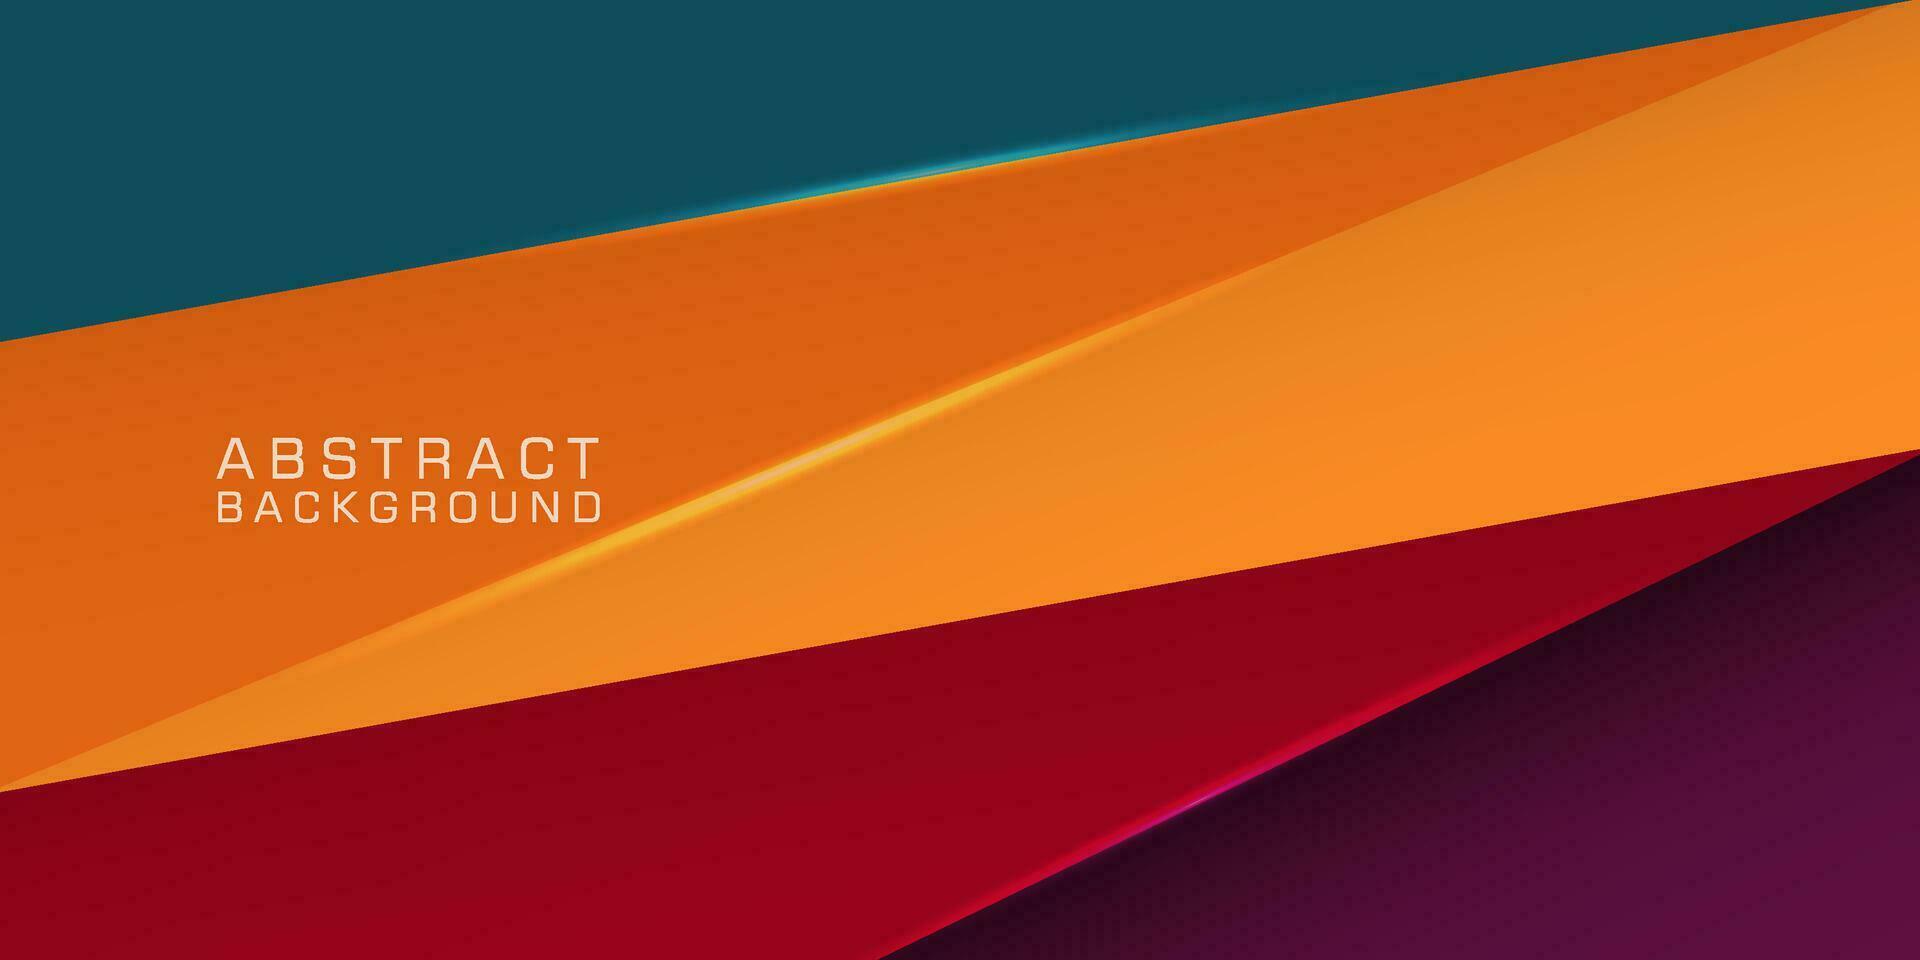 Abstract colorful green, orange, red, and purple triangle overlap background. 3d look with shadow pattern shapes composition with space for text. Eps10 vector